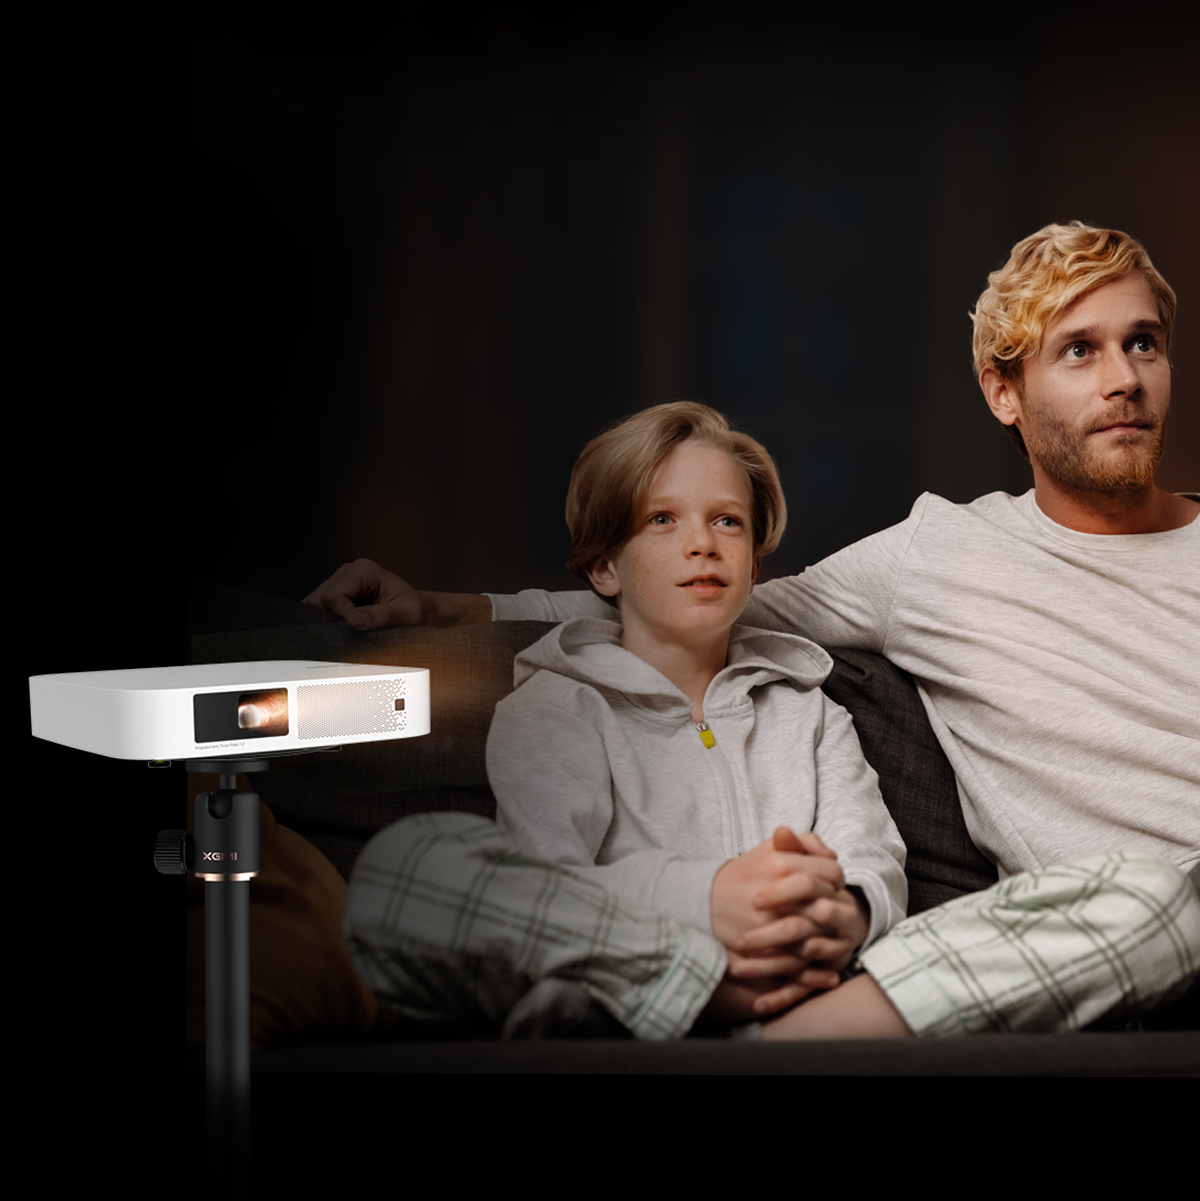 Enjoy Comedy Movie Humor at its
Best With Smart Projectors